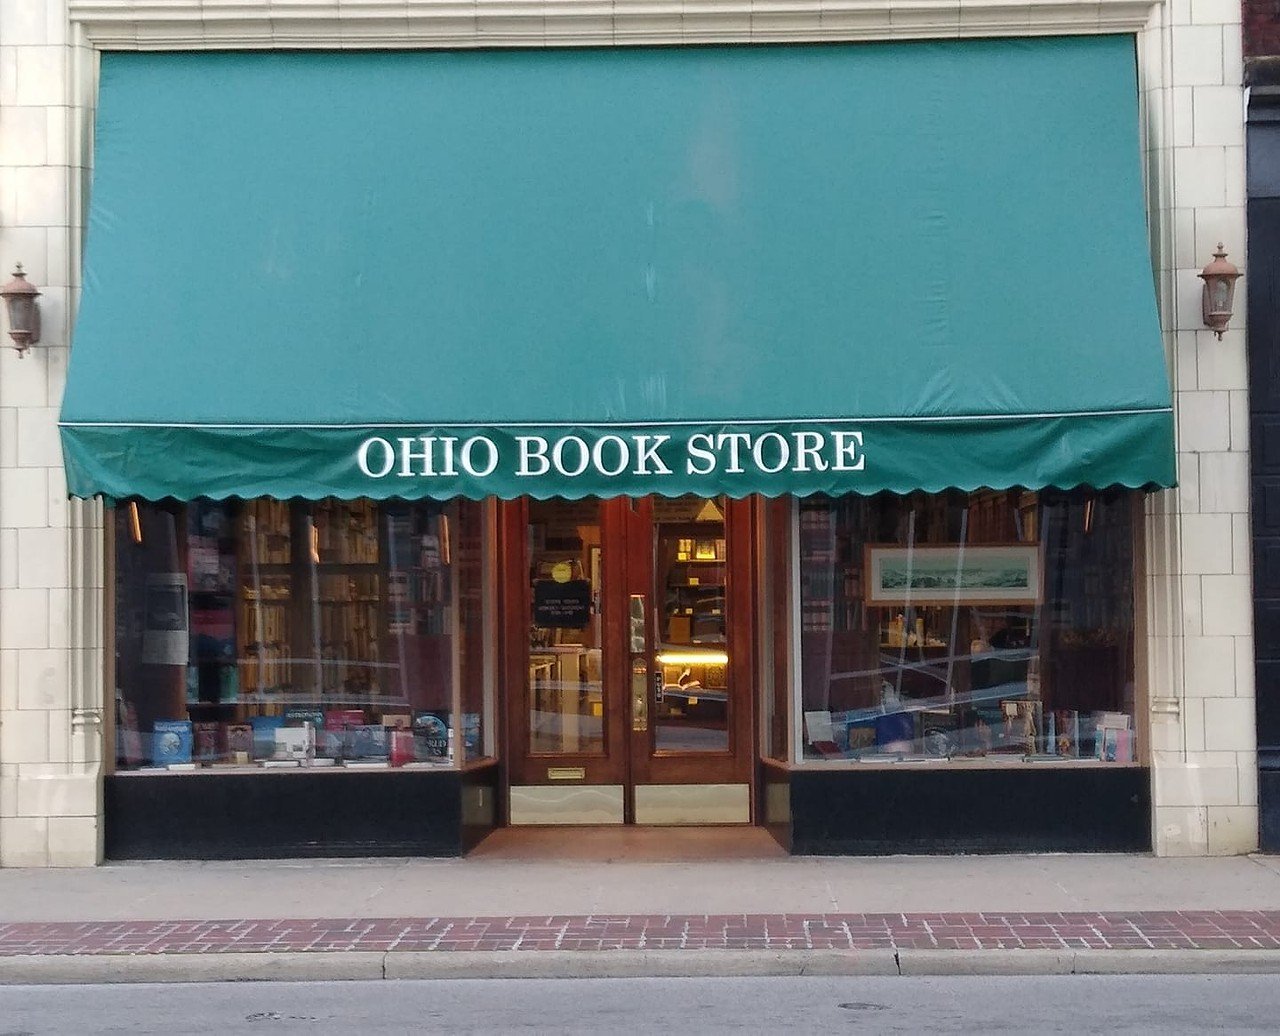 No. 7 Best Bookstore: Ohio Book Store
726 Main St., Downtown